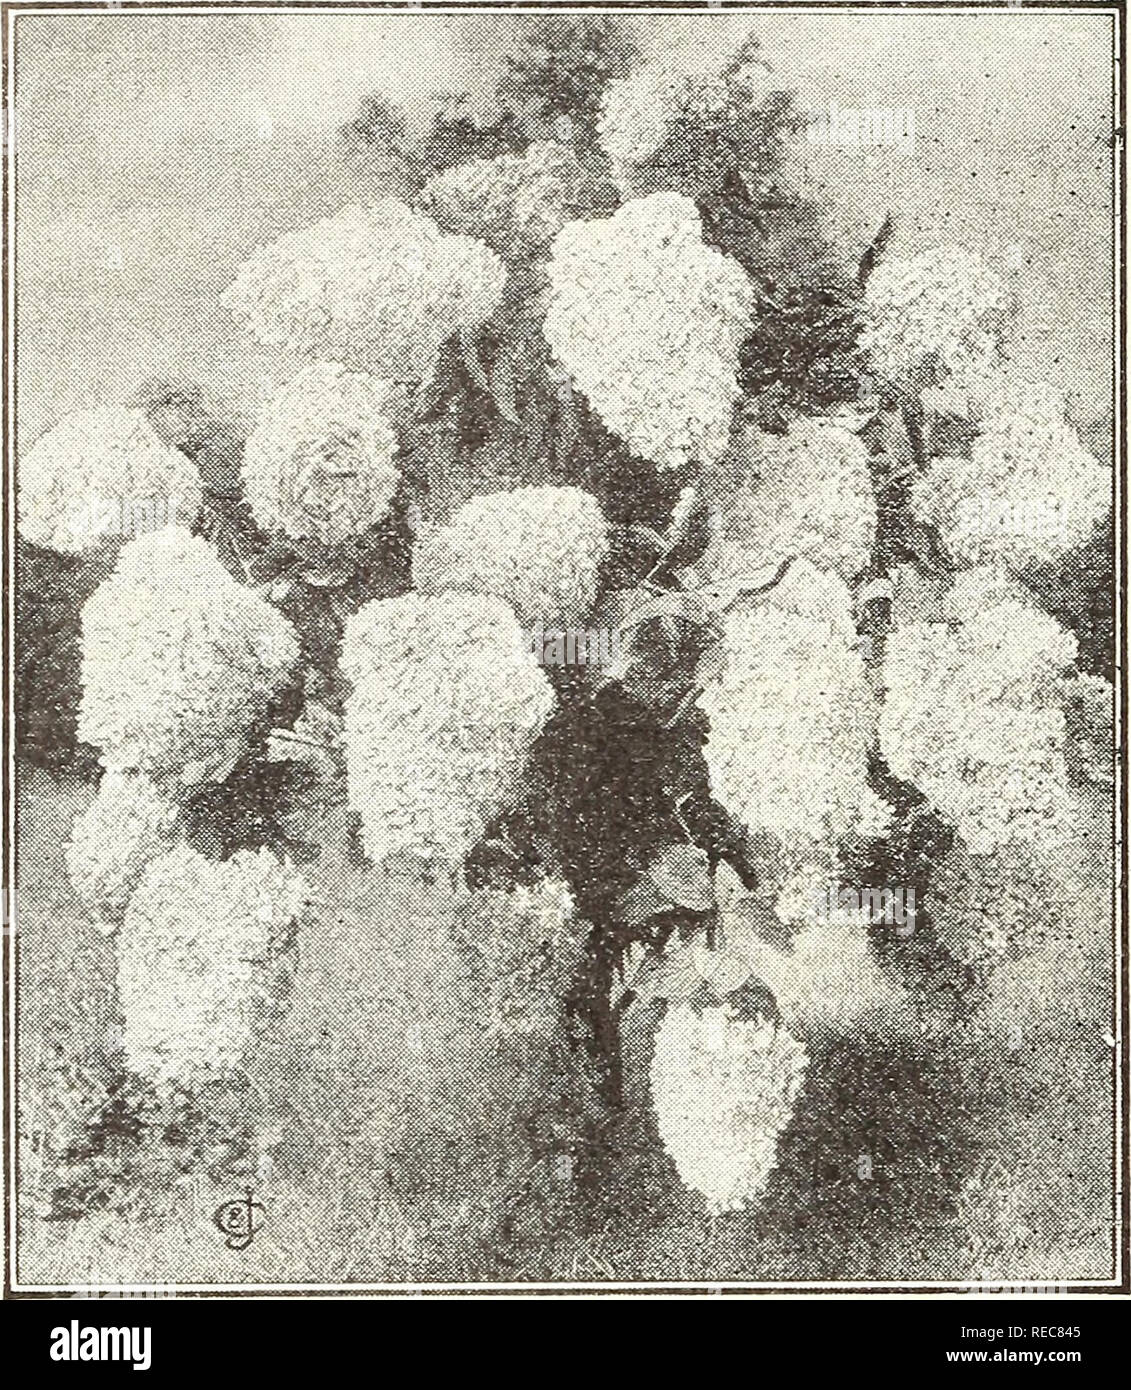 . The Conard-Pyle Co. : star rose growers [autumn 1930]. Rose culture; Roses; Flowers Seeds Catalogs; Plants, Ornamental Seeds Catalogs. THE CONARD-PYLE CO. JtarRpse Qrowersâ¢ West Qrove.Pa, Hardy Ornamental Flowering Shrubs SEE PRICES AT FOOT OF THE PAGE (except where noted after the variety) New Red-leaved Japanese Barberry A NOVELTY IN SHRUBS The foliage is rich, lustrous, bronzy maroon red, becoming more gorgeous as the summer advances. The small yellow blooms are followed by brilliant scarlet berries that remain on the bushes. A charm- ing plant to use in spots along a sunny shrub border  Stock Photo